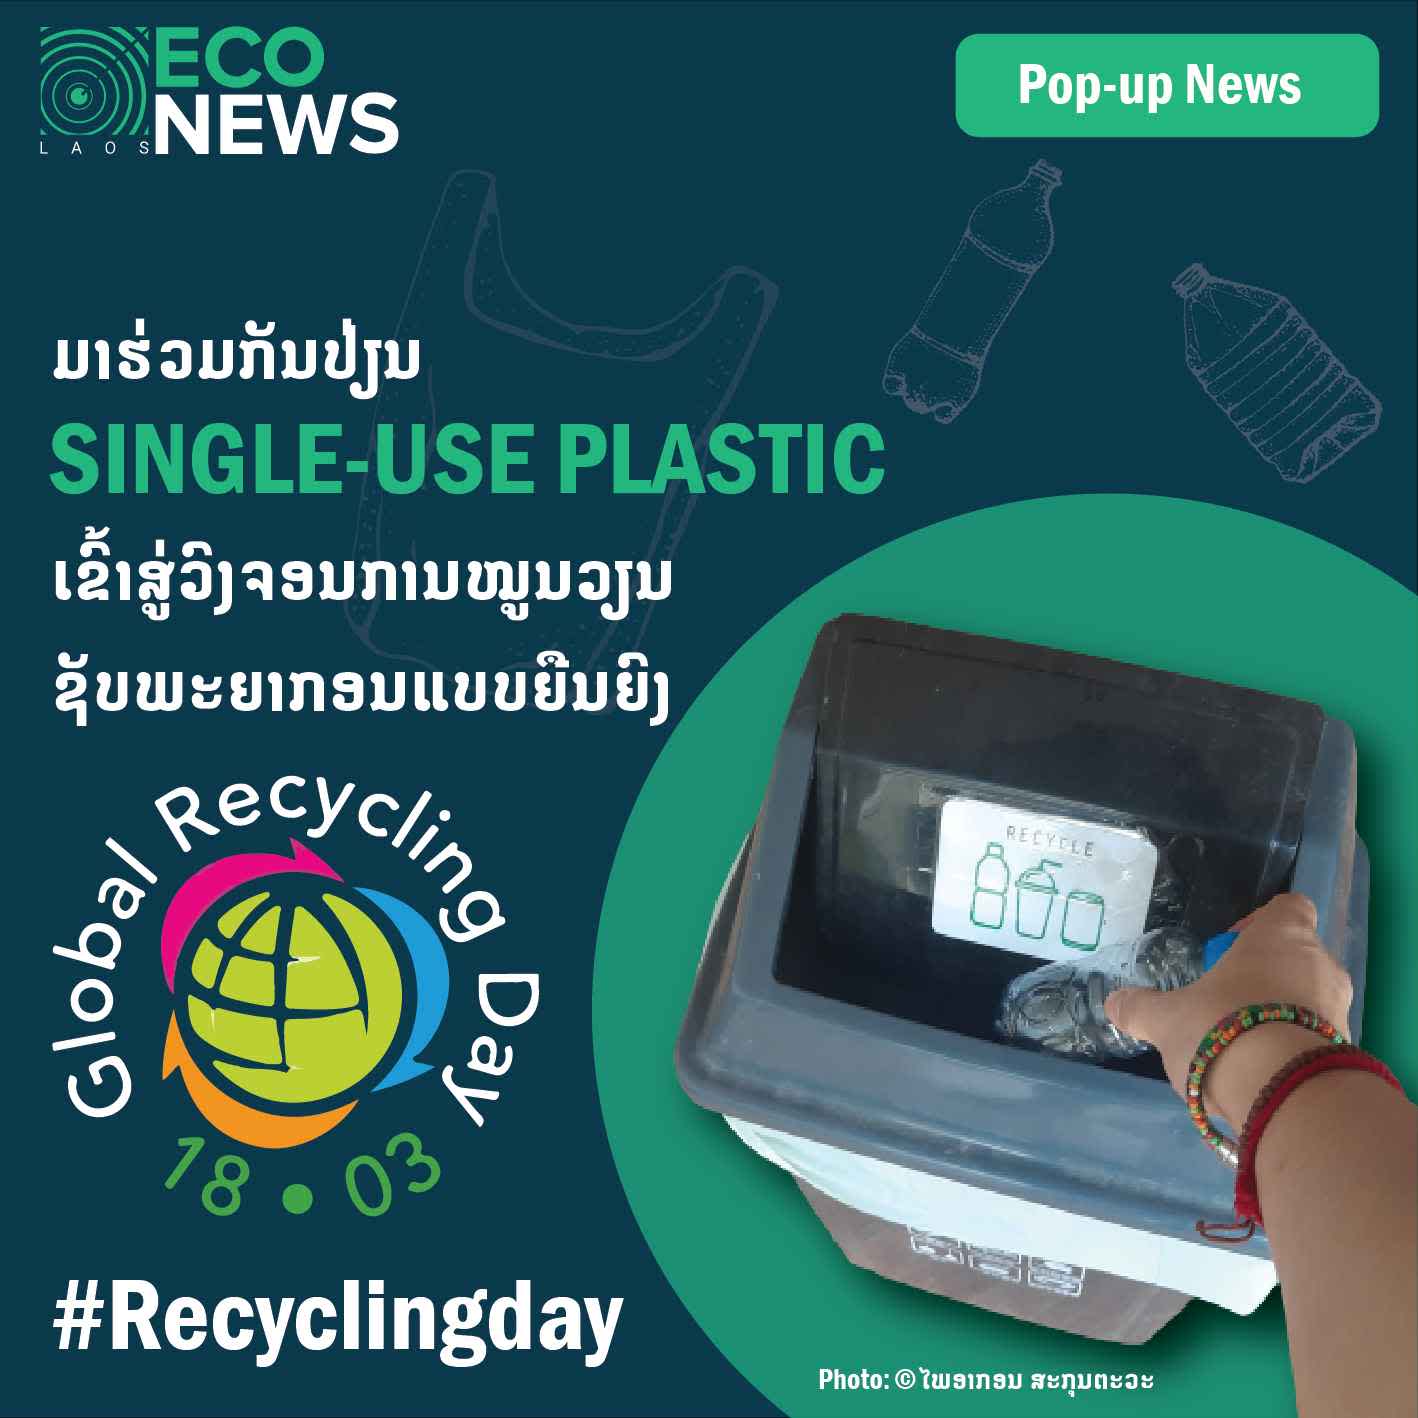 Global recycling day 18 March 2022